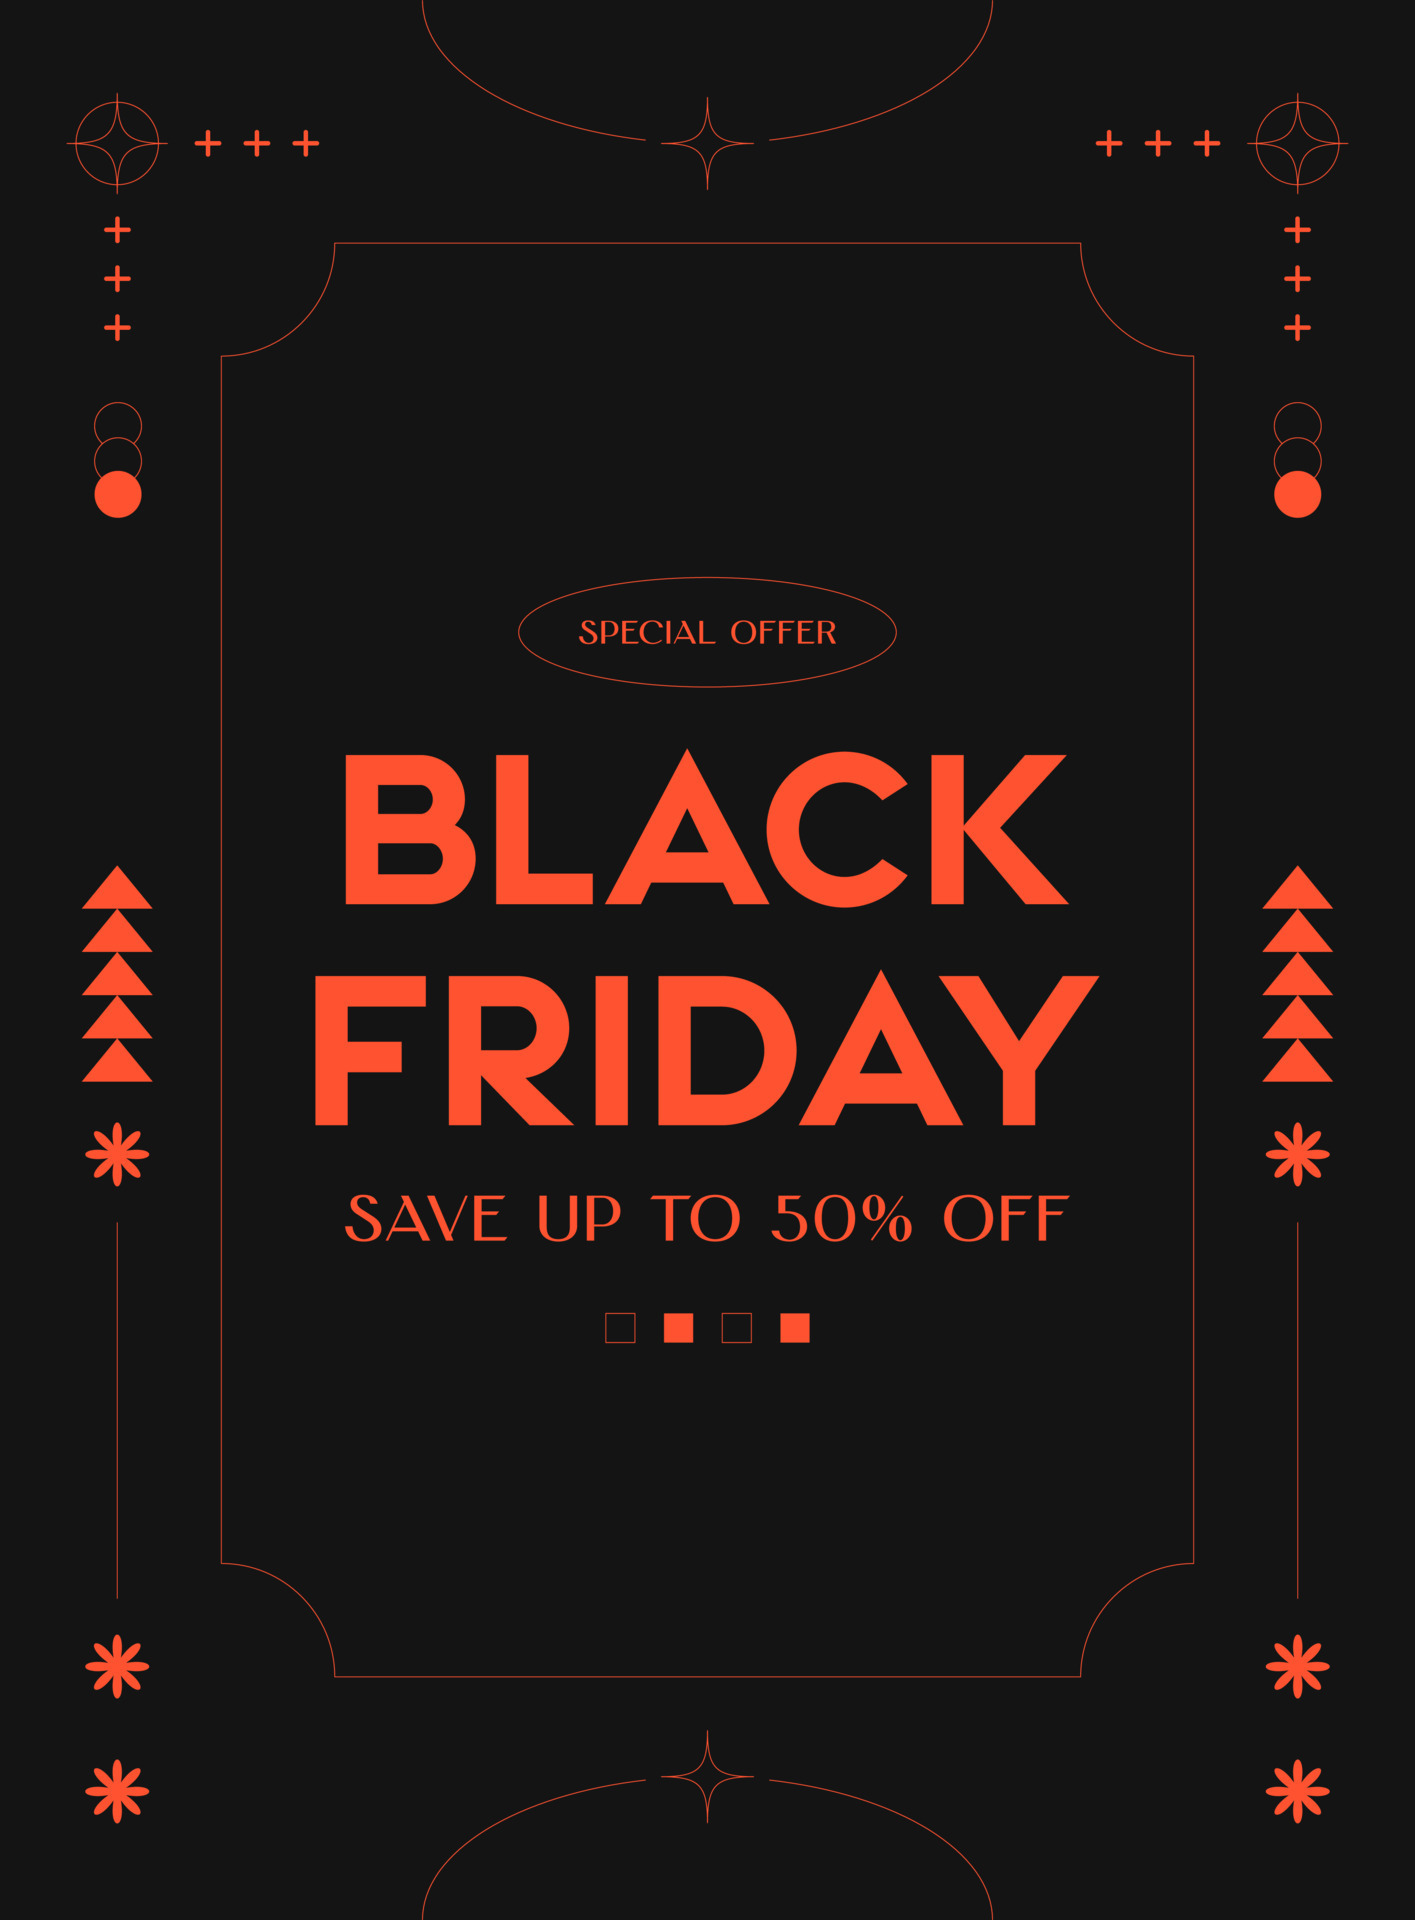 Great Black Friday flyer template